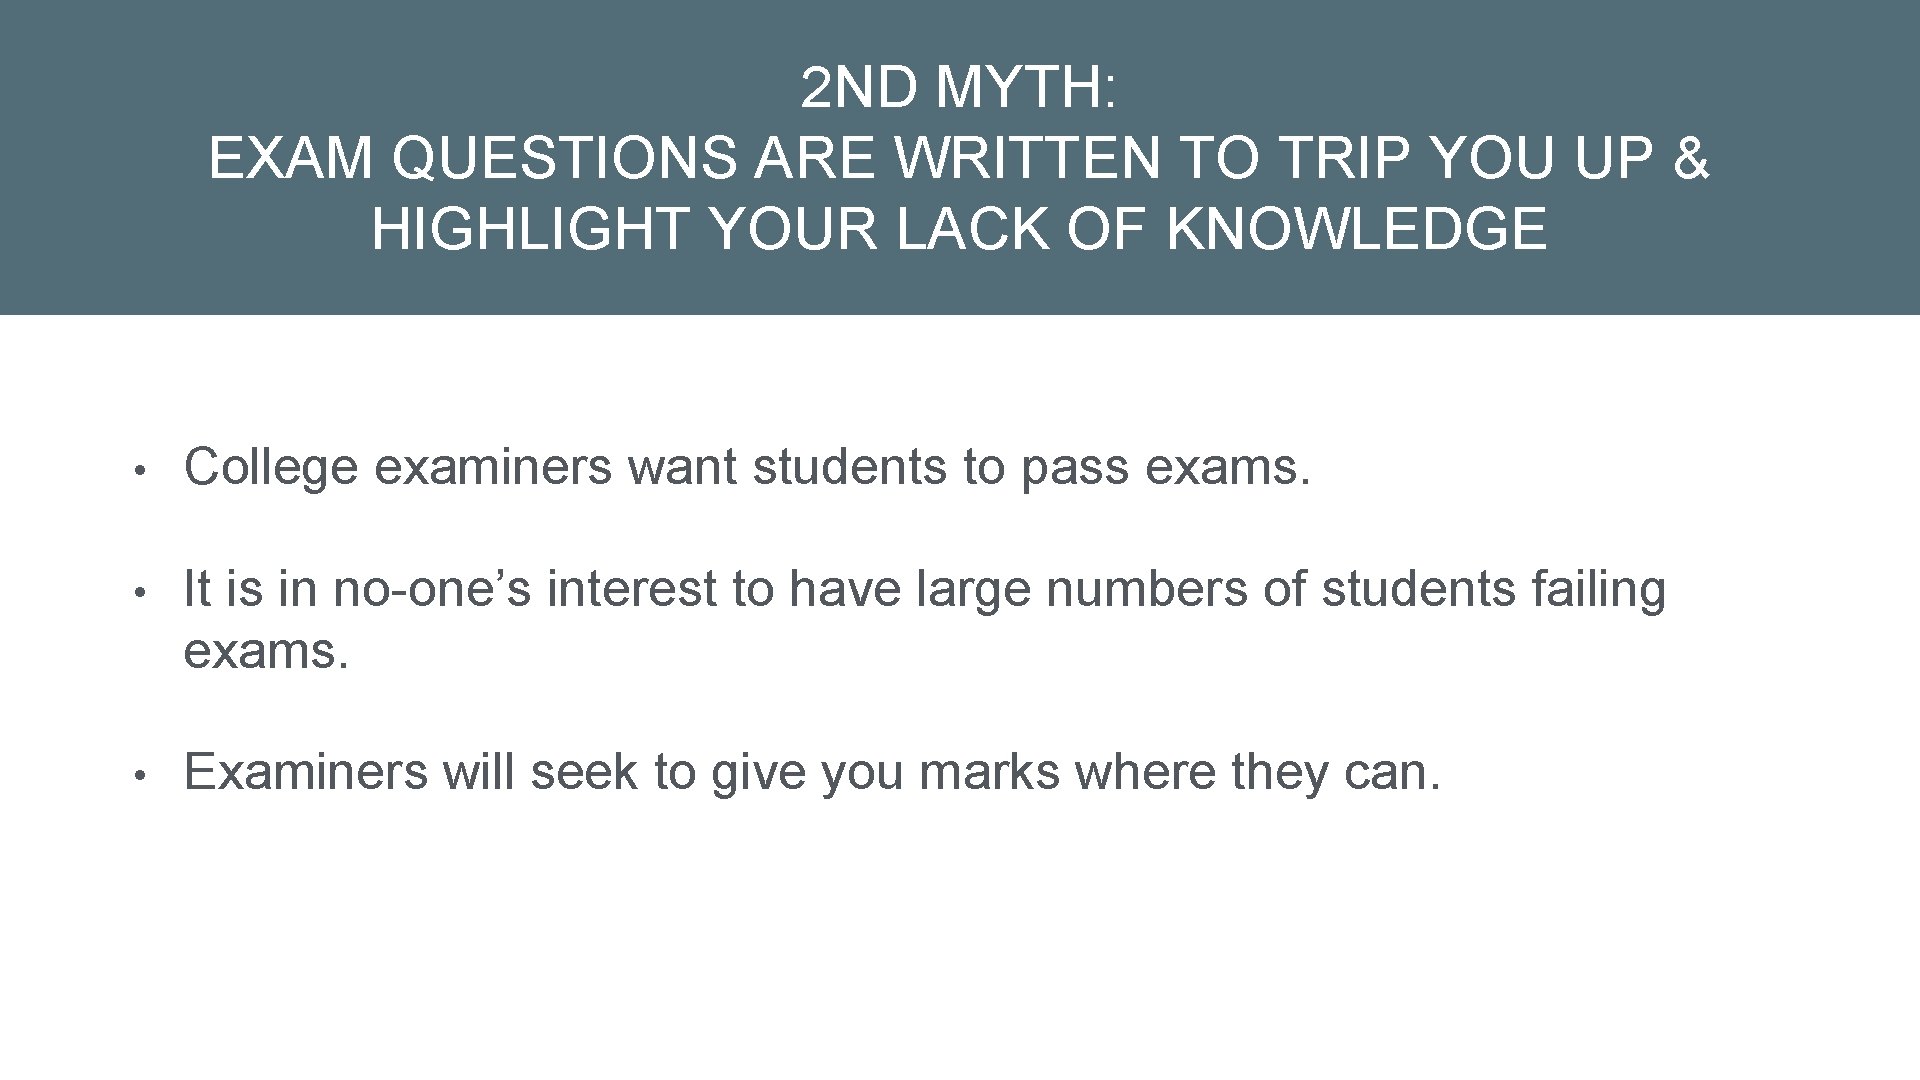 2 ND MYTH: EXAM QUESTIONS ARE WRITTEN TO TRIP YOU UP & HIGHLIGHT YOUR